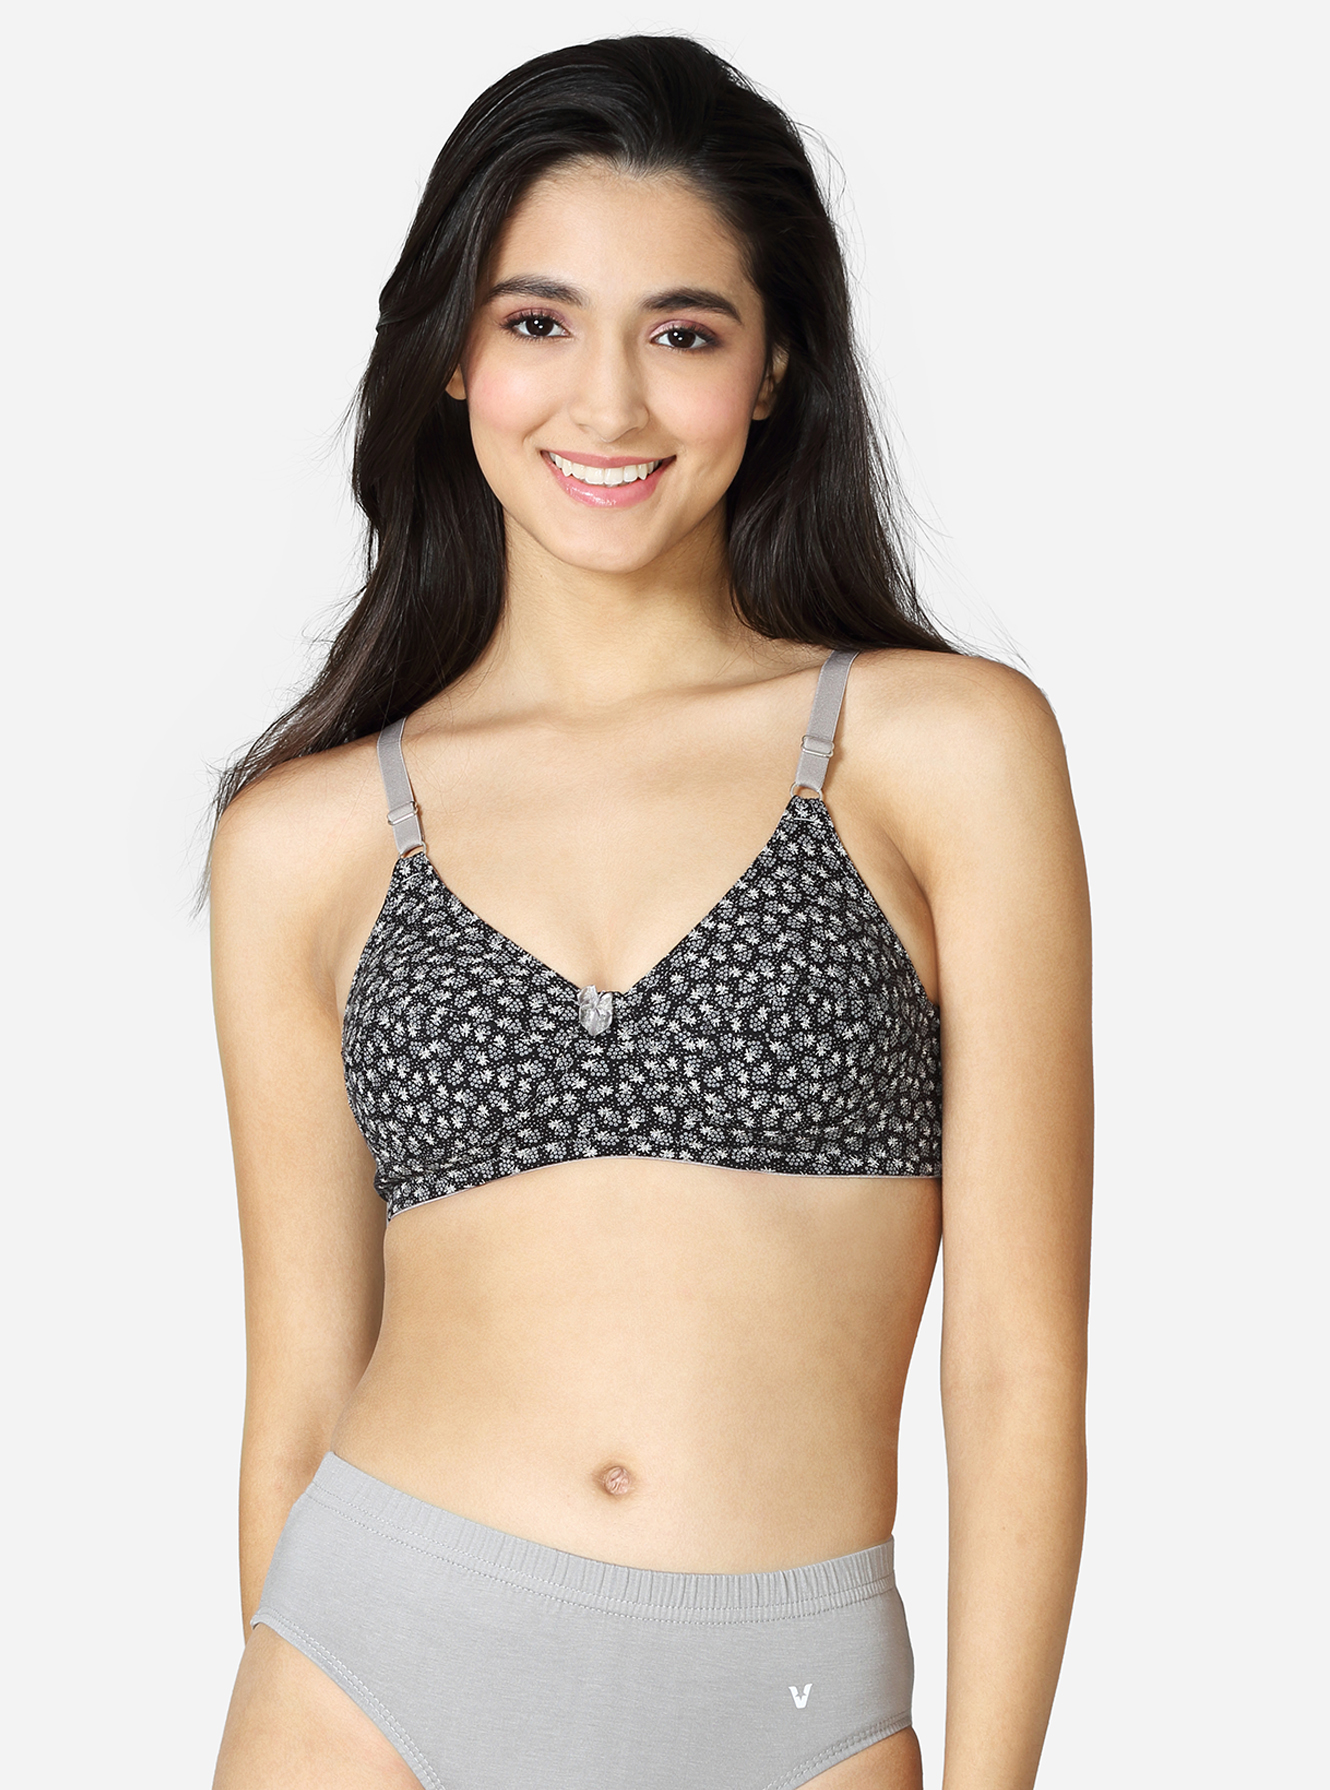 Buy VStar Double Layered Non Wired Full Coverage Super Support Bra - Nude  Skin at Rs.447 online